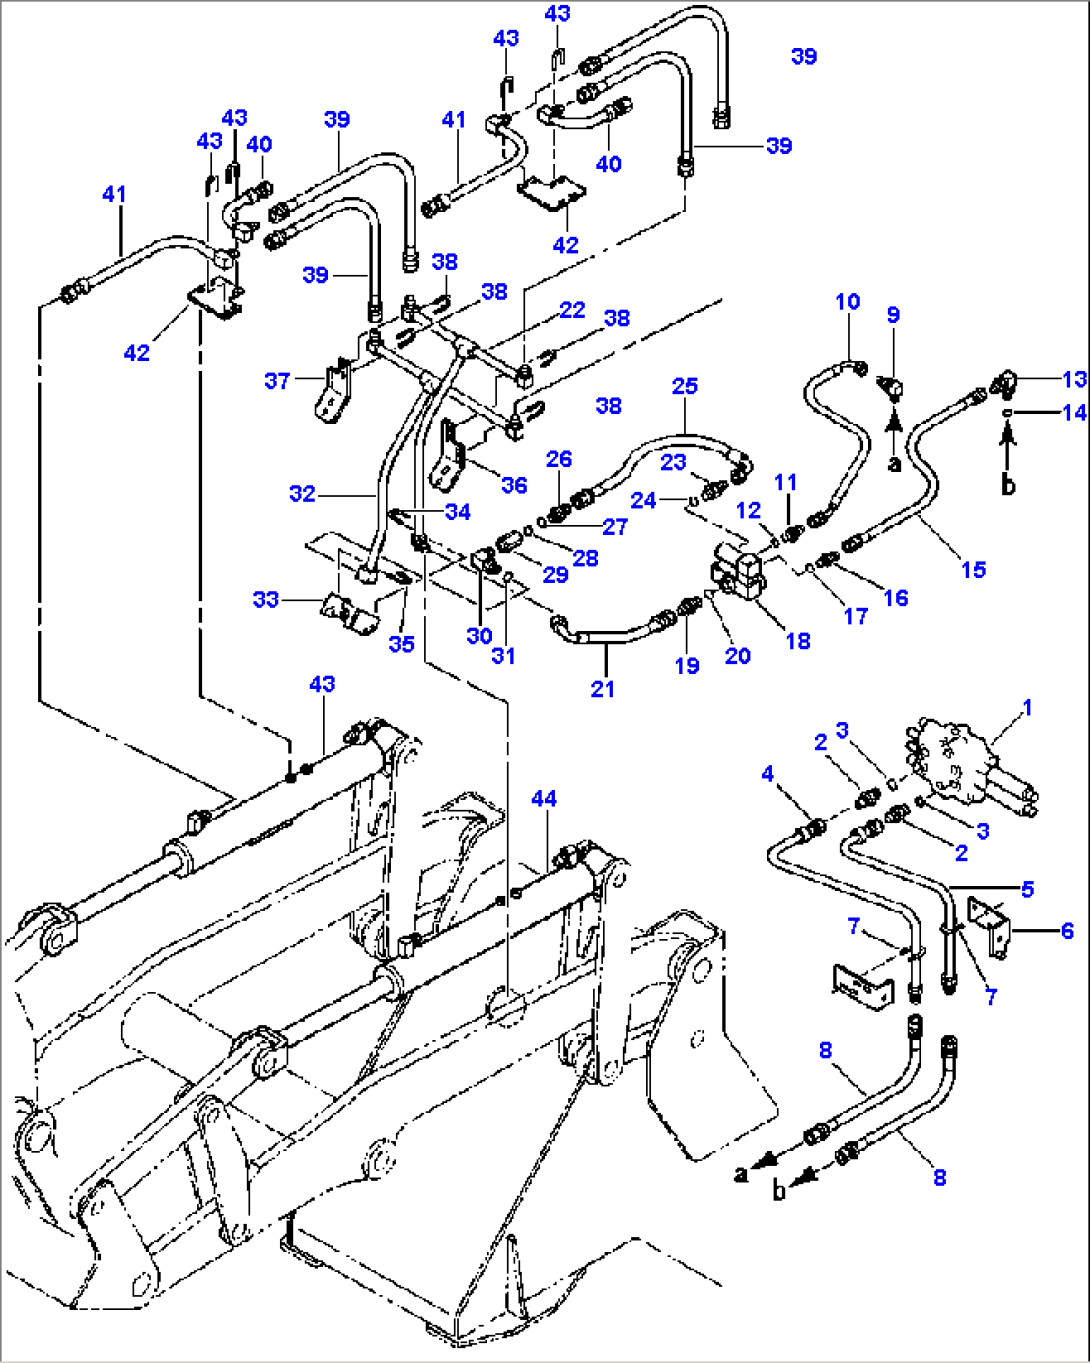 HYDRAULIC PIPING CONTROL VALVE TO DUMP CYLINDER - MACHINES WITH PARALLEL TOOL CARRIER